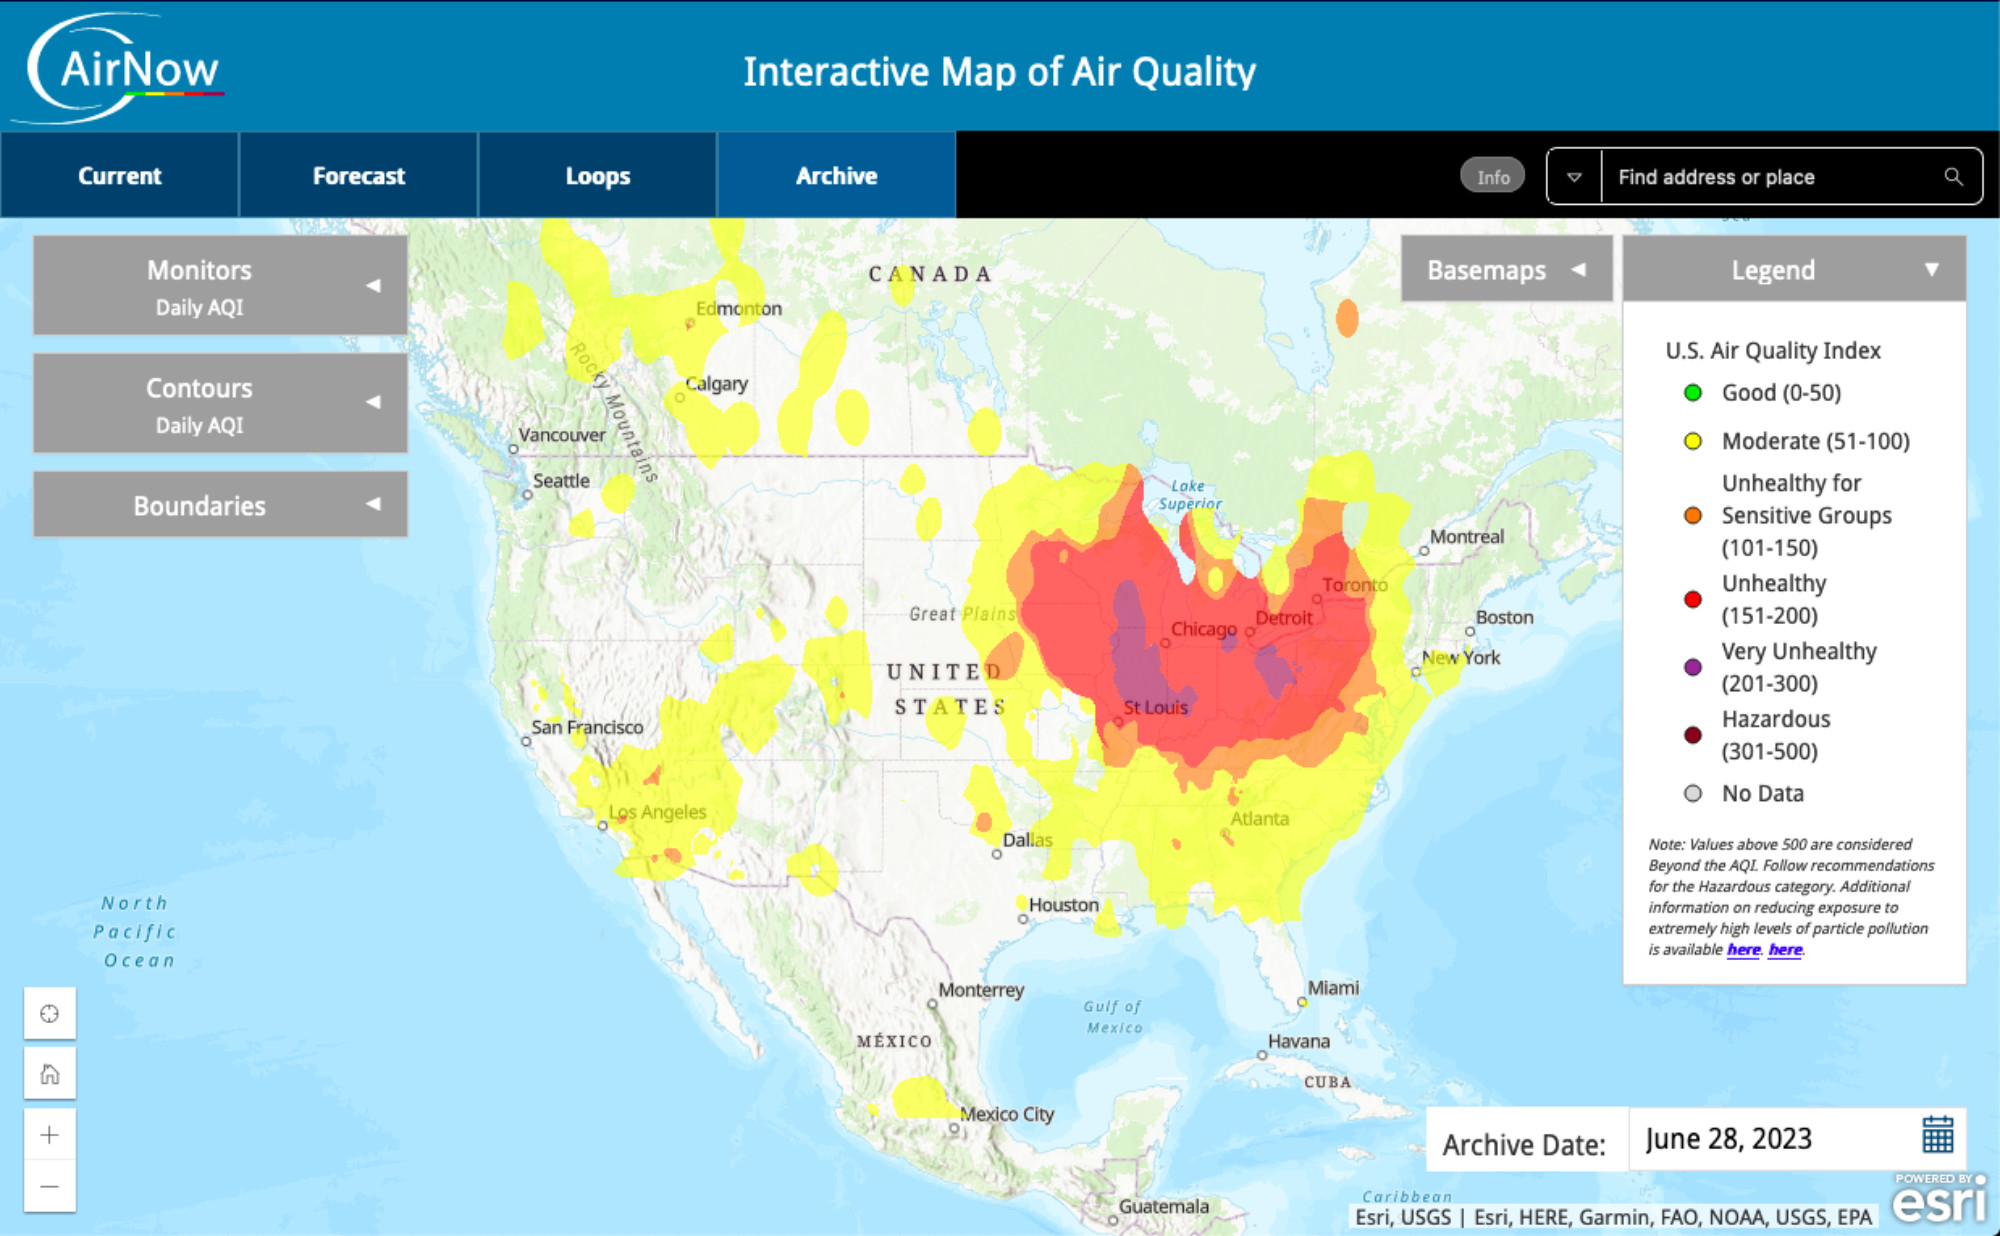 Map of the U.S. showing a large region of poor air quality